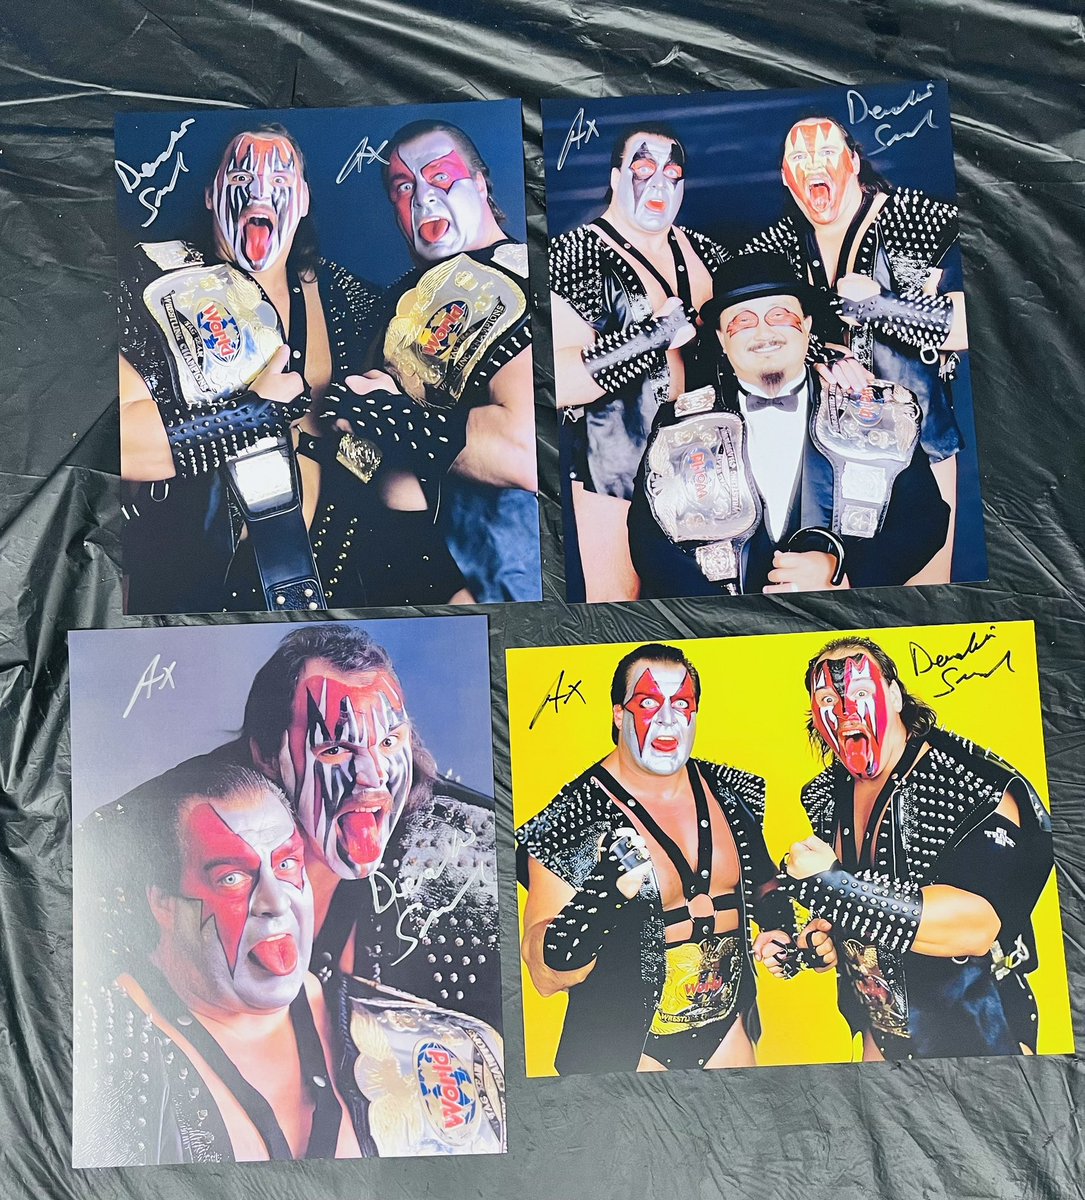 We have a few extra Demolition signed 8X10s from last weekend’s @80sWrestlingCon. Please message us if you are interested in one. Thank you!